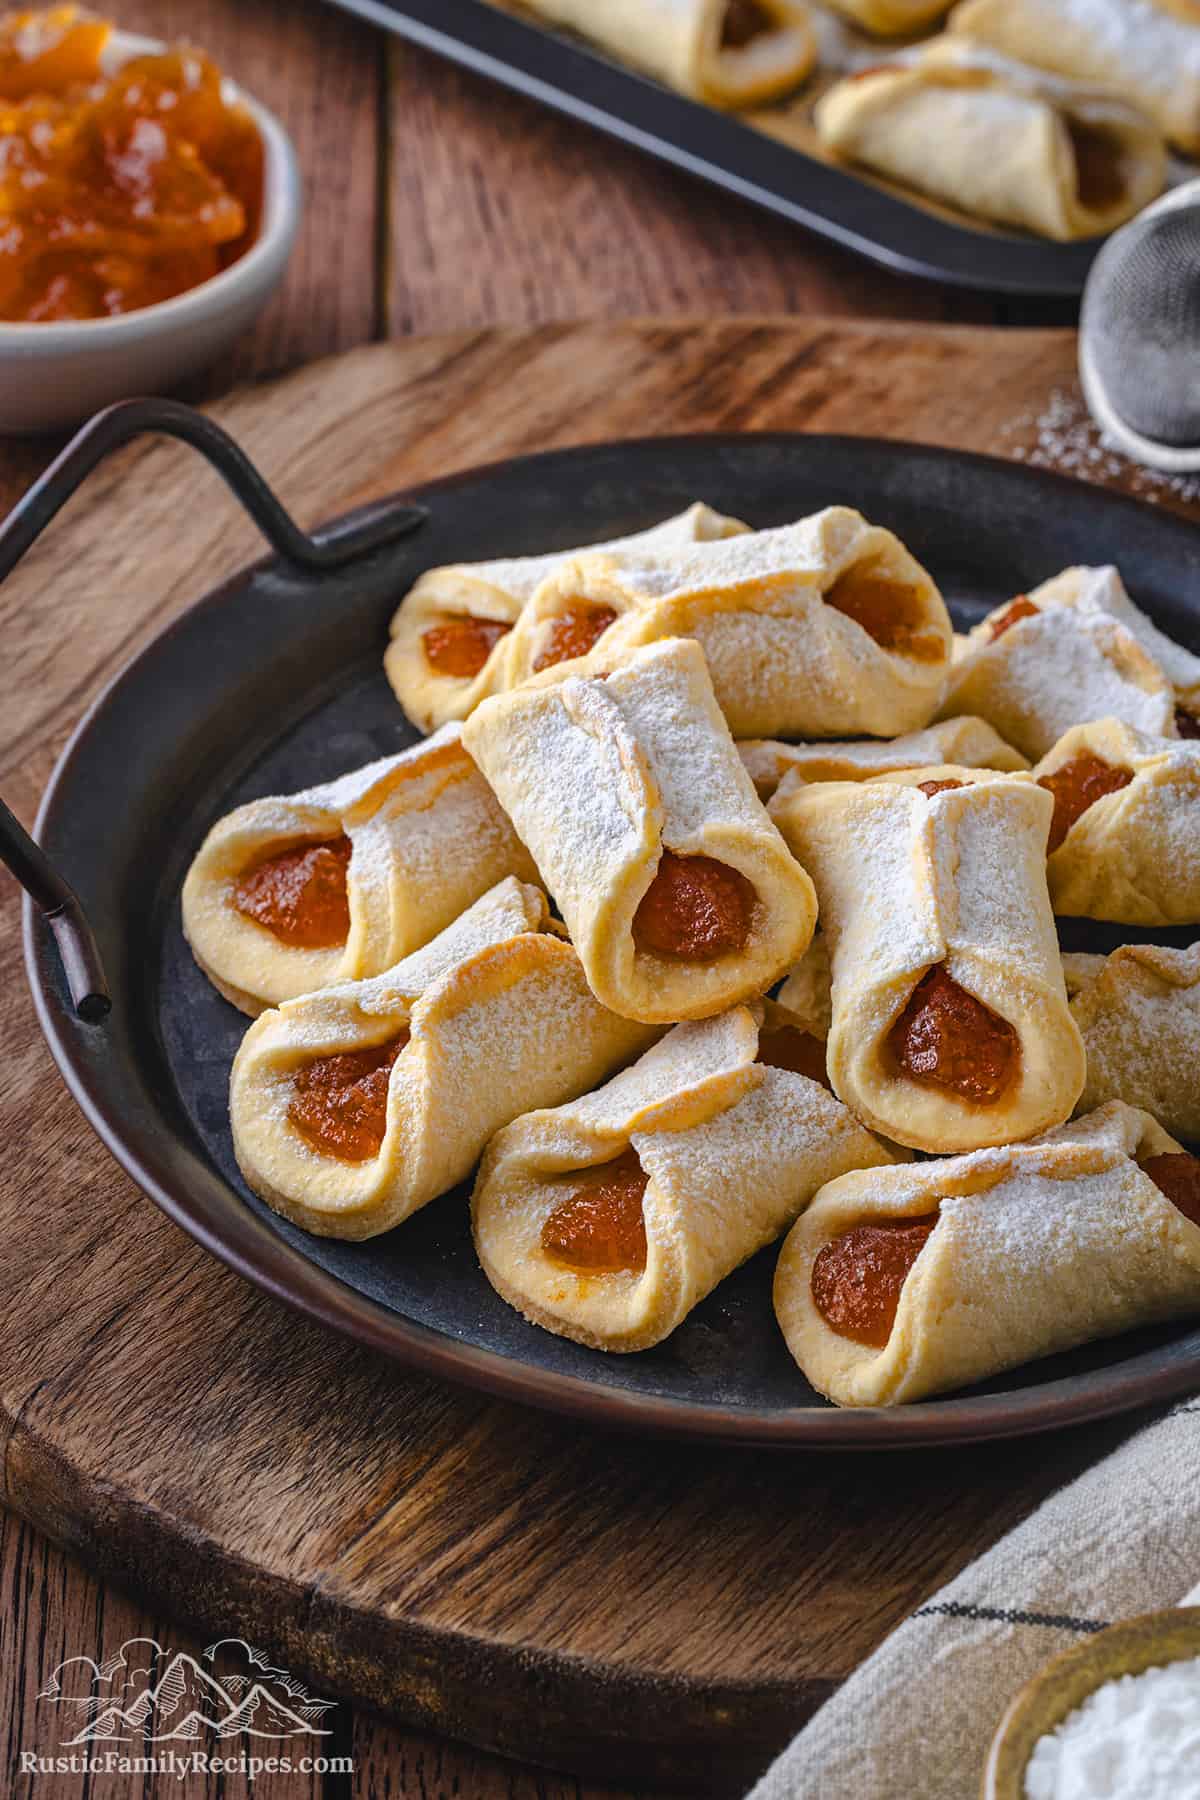 Close up of assorted pizzicati cookies filled with jam and dusted with powdered sugar on a dark plate, with a bowl of apricot jam and more cookies in the background.